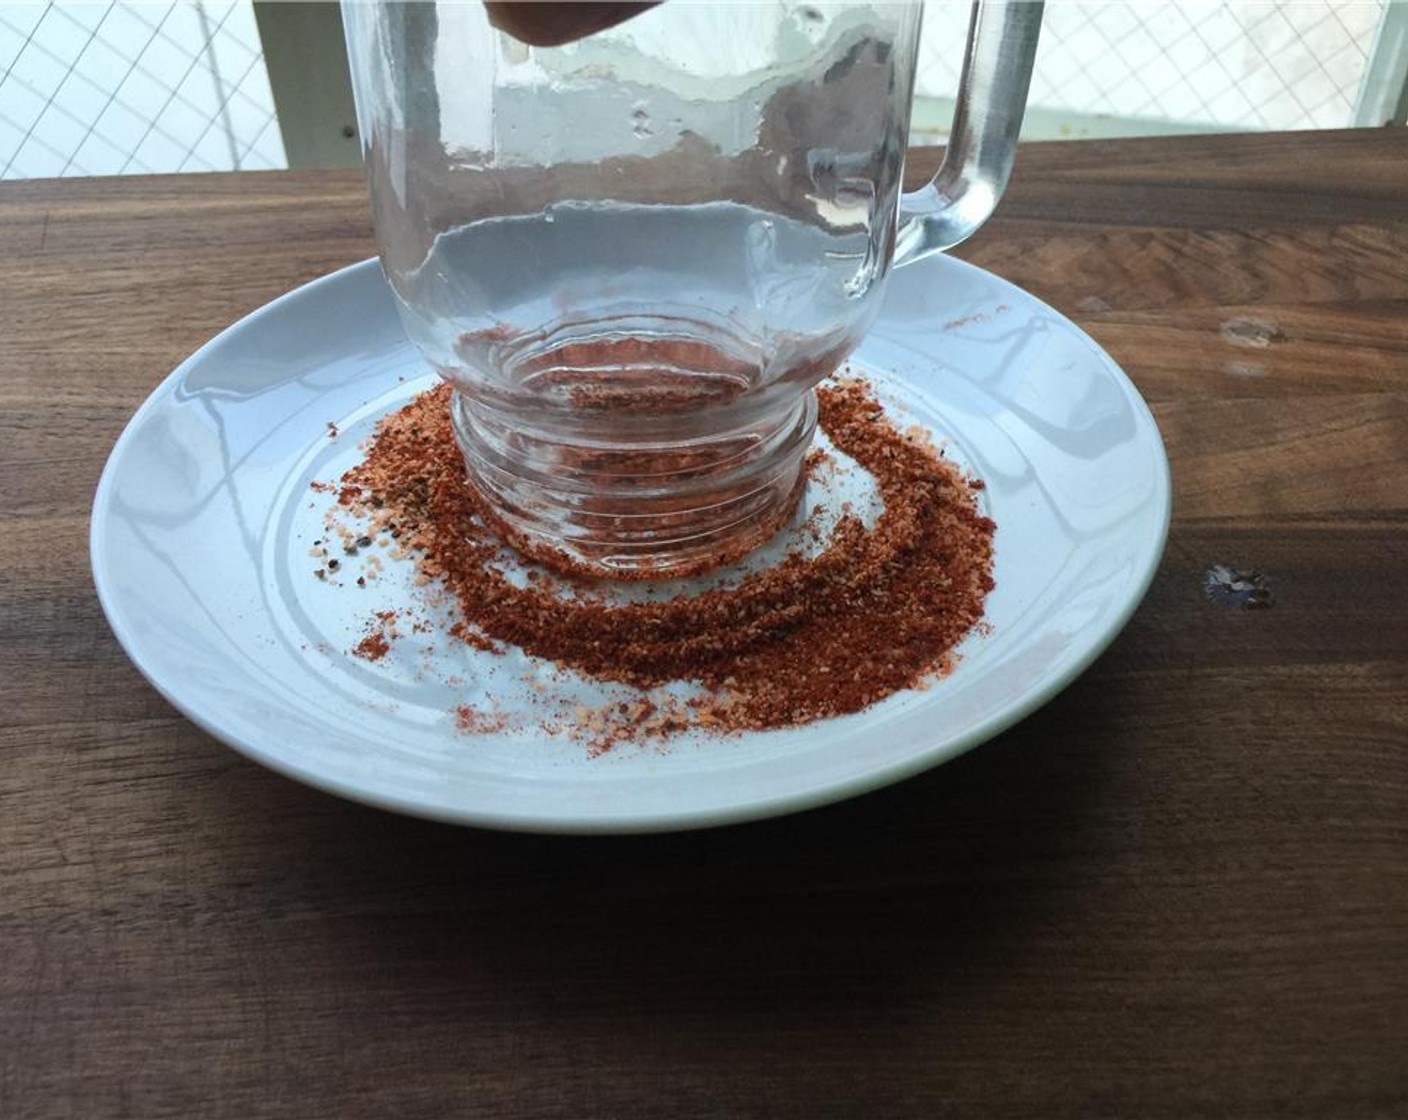 step 2 Combine Salt (1/2 tsp), Freshly Ground Black Pepper (1/2 tsp) and Chili Powder (1/2 tsp) on a small plate. Rim the glass with a Lime Wedge and then rim the glass in the salt mixture.